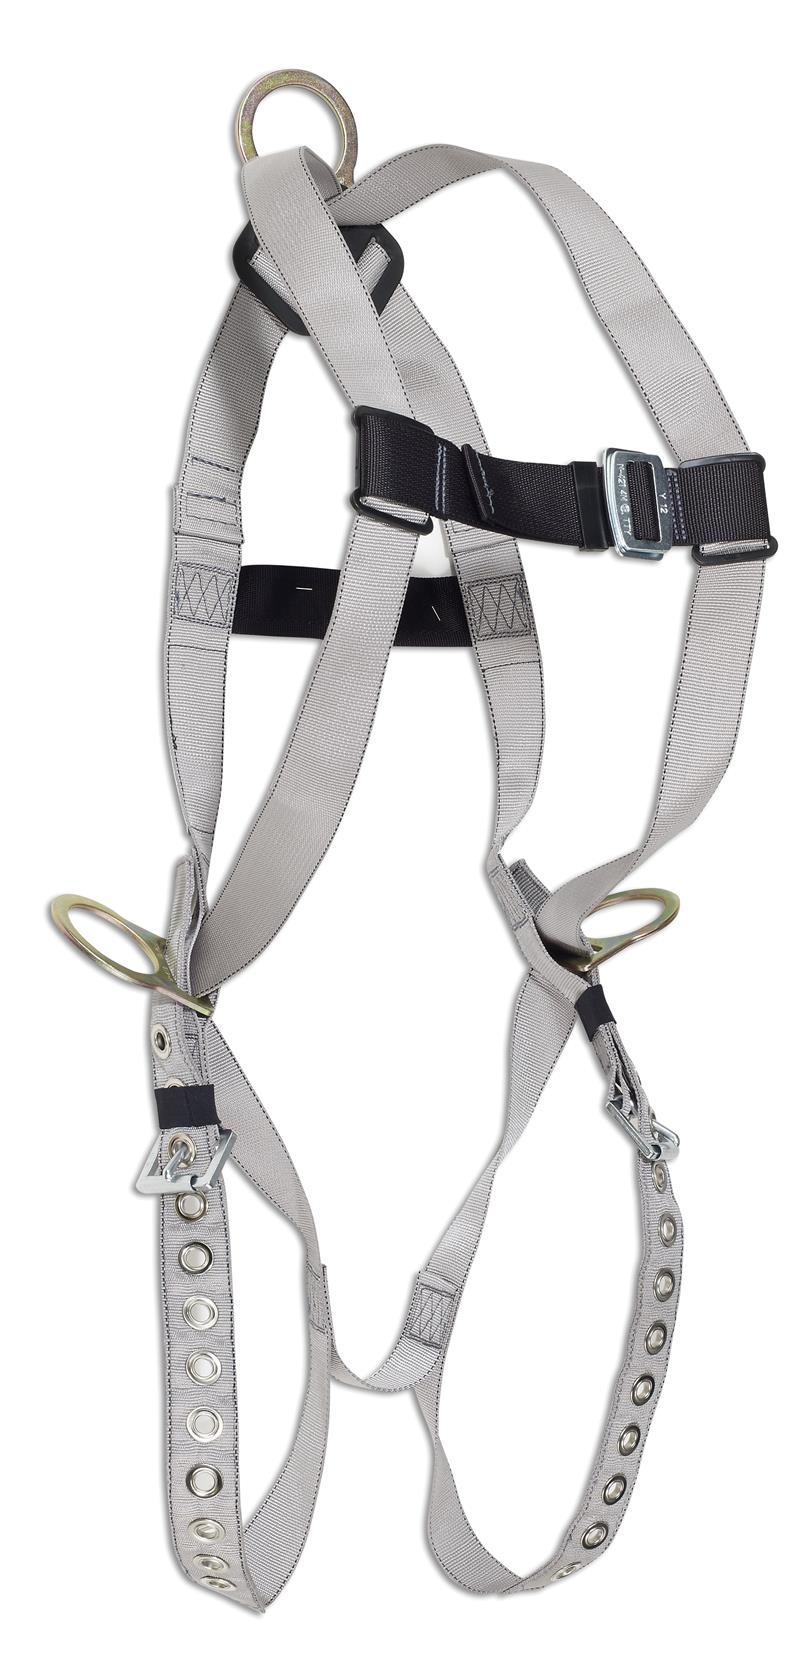 B-Compliant Work Positioning Harness With Tongue Buckles Leg Strap Connectors